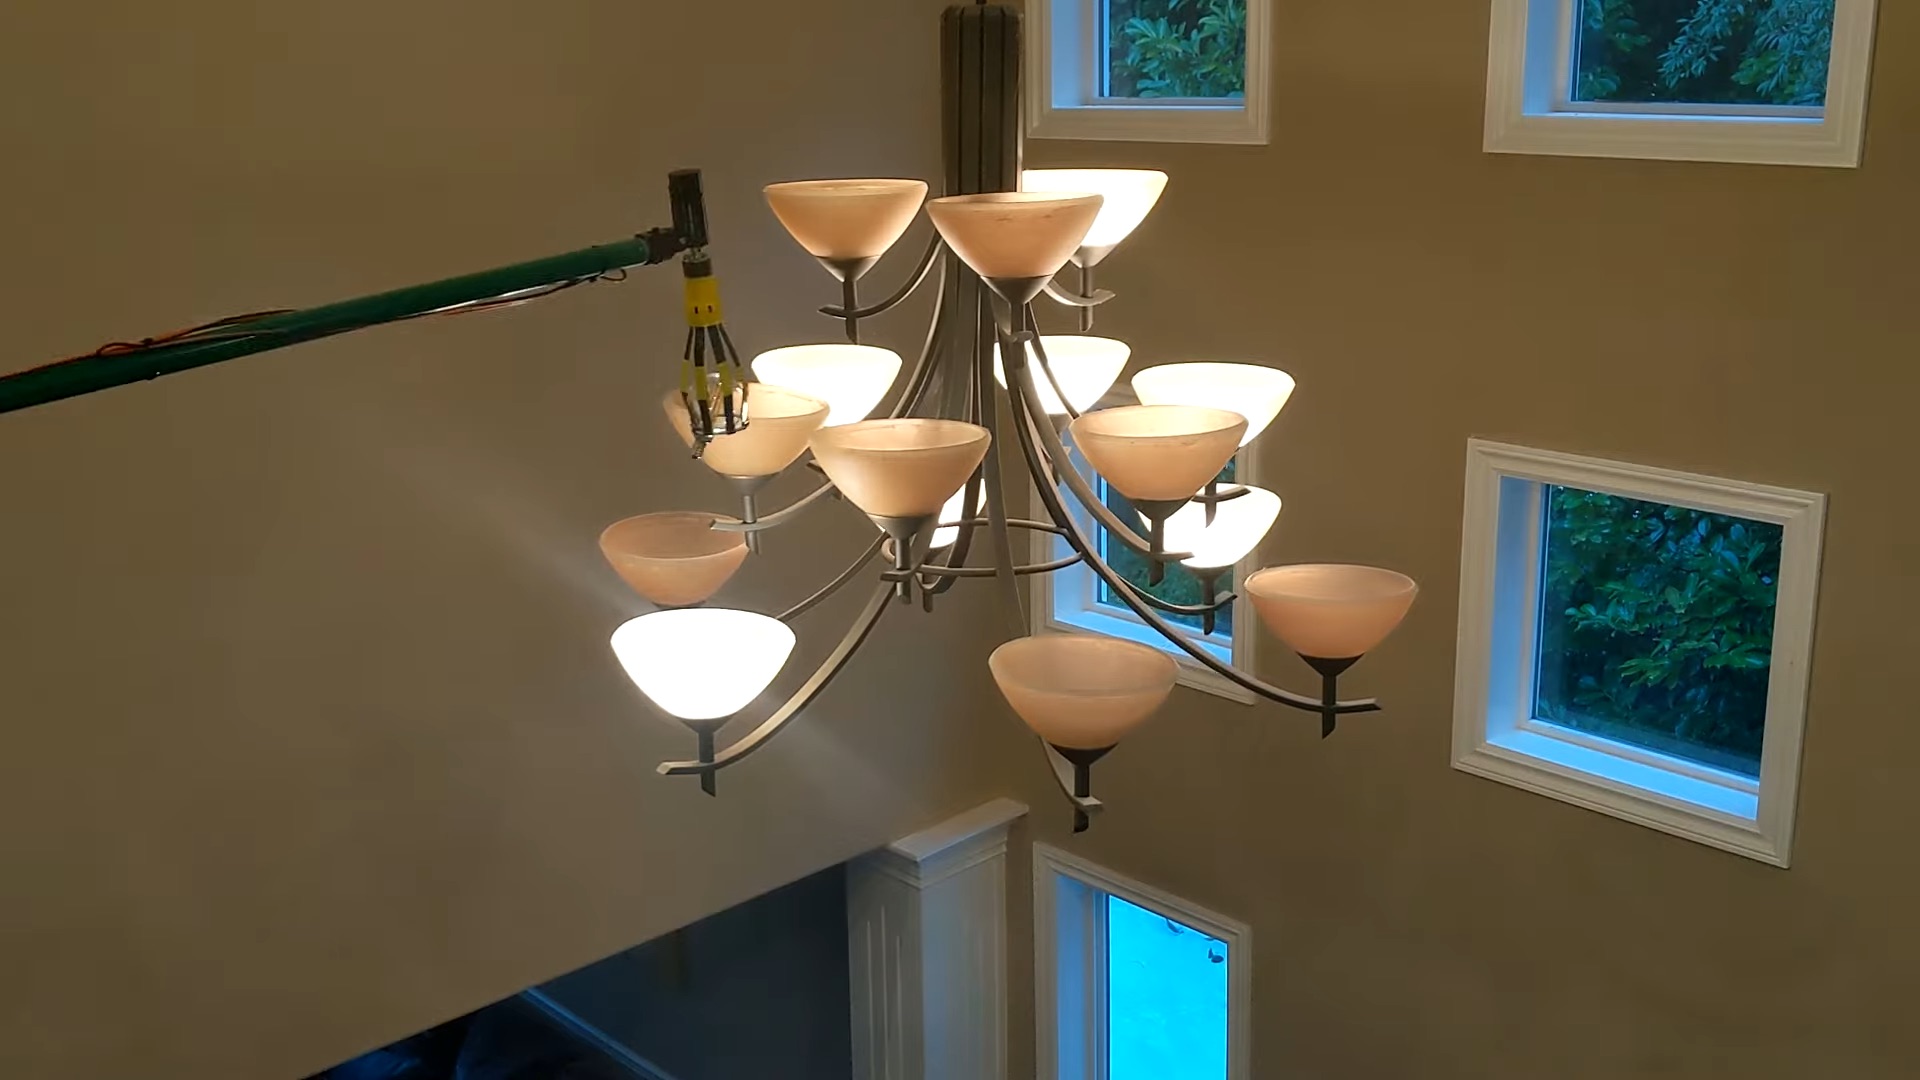 How To Change Light Bulb On High Ceiling